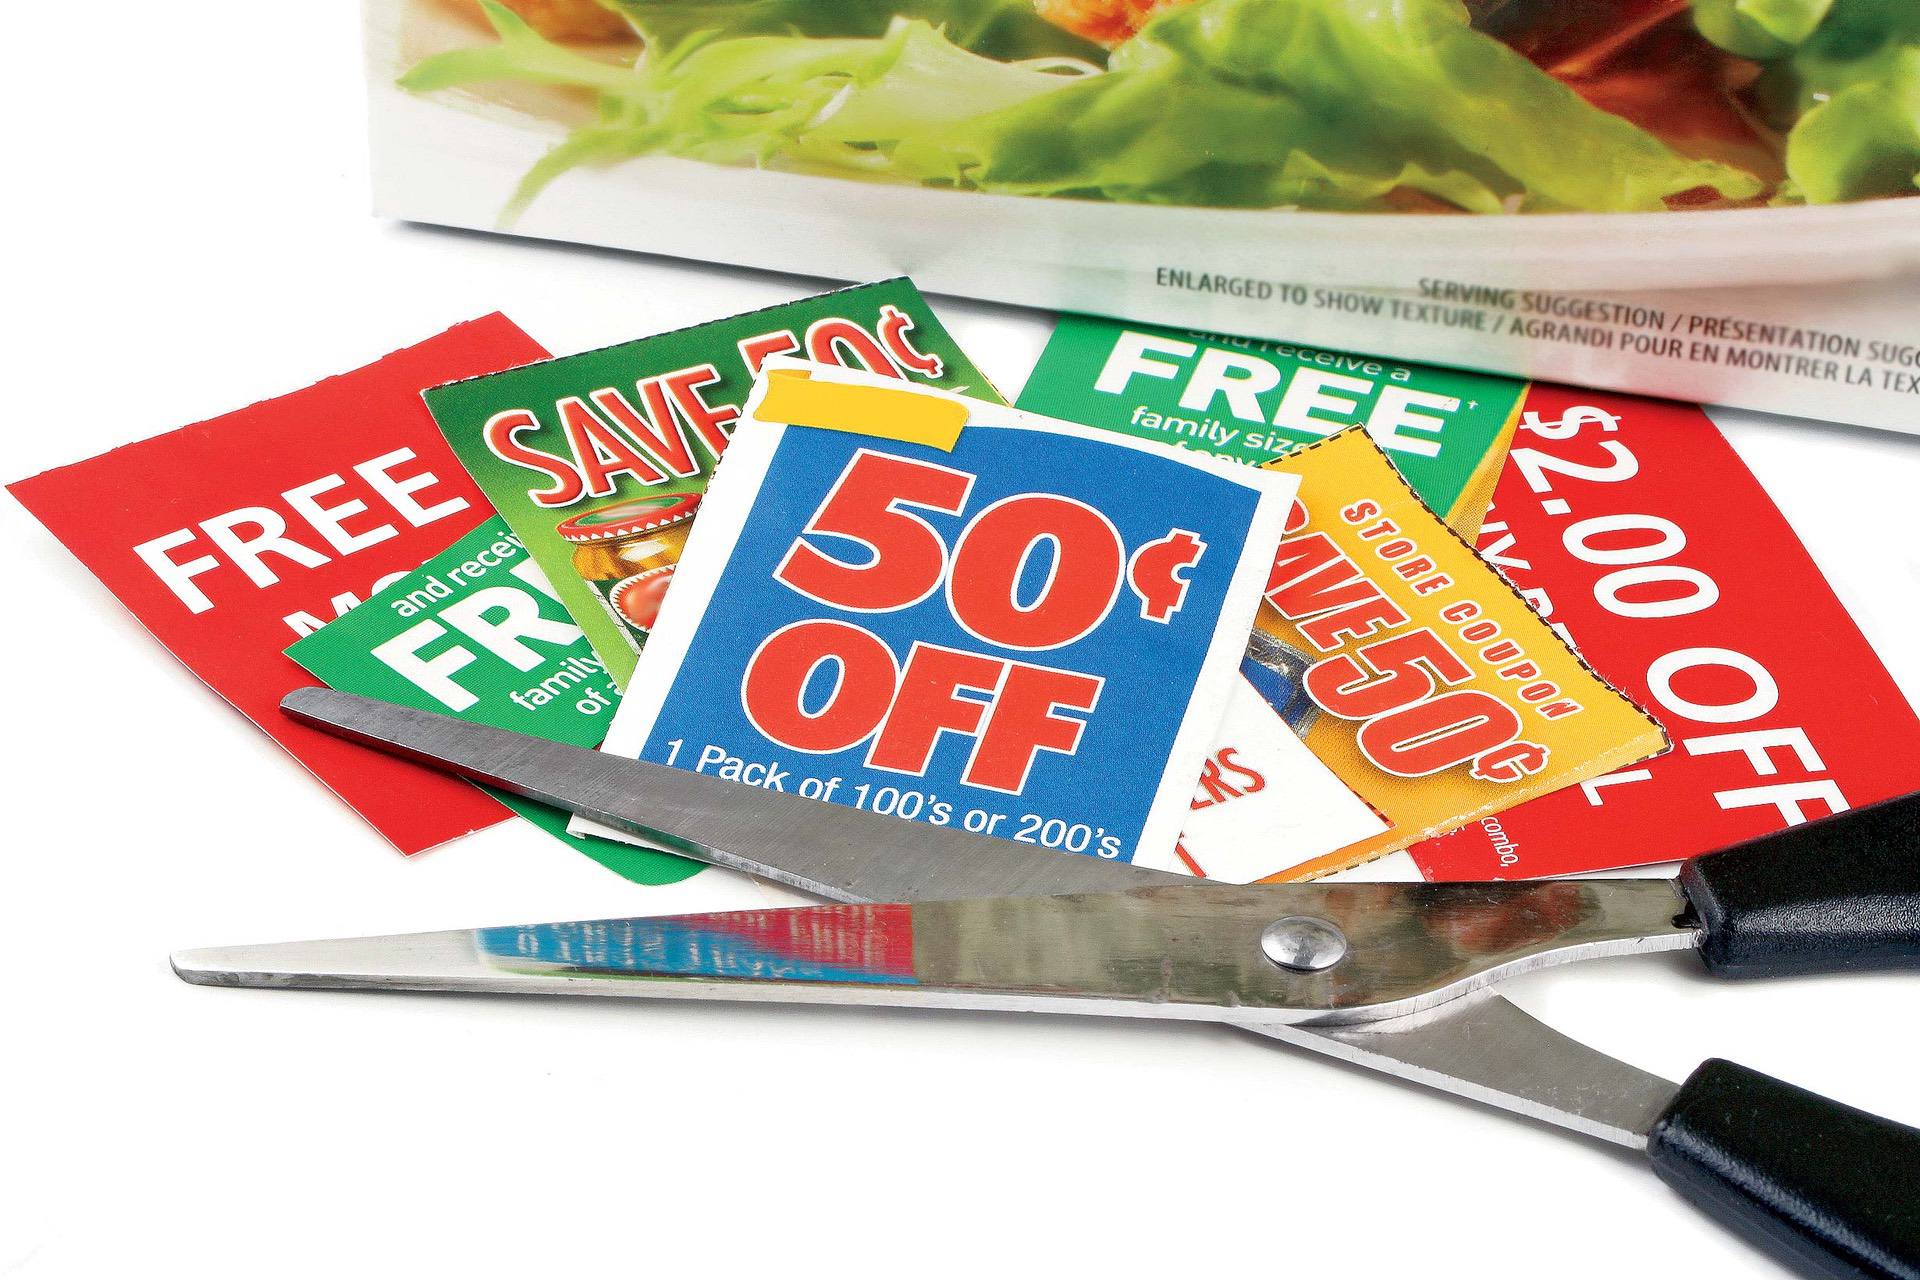 Pair of scissors next to cut-out coupons